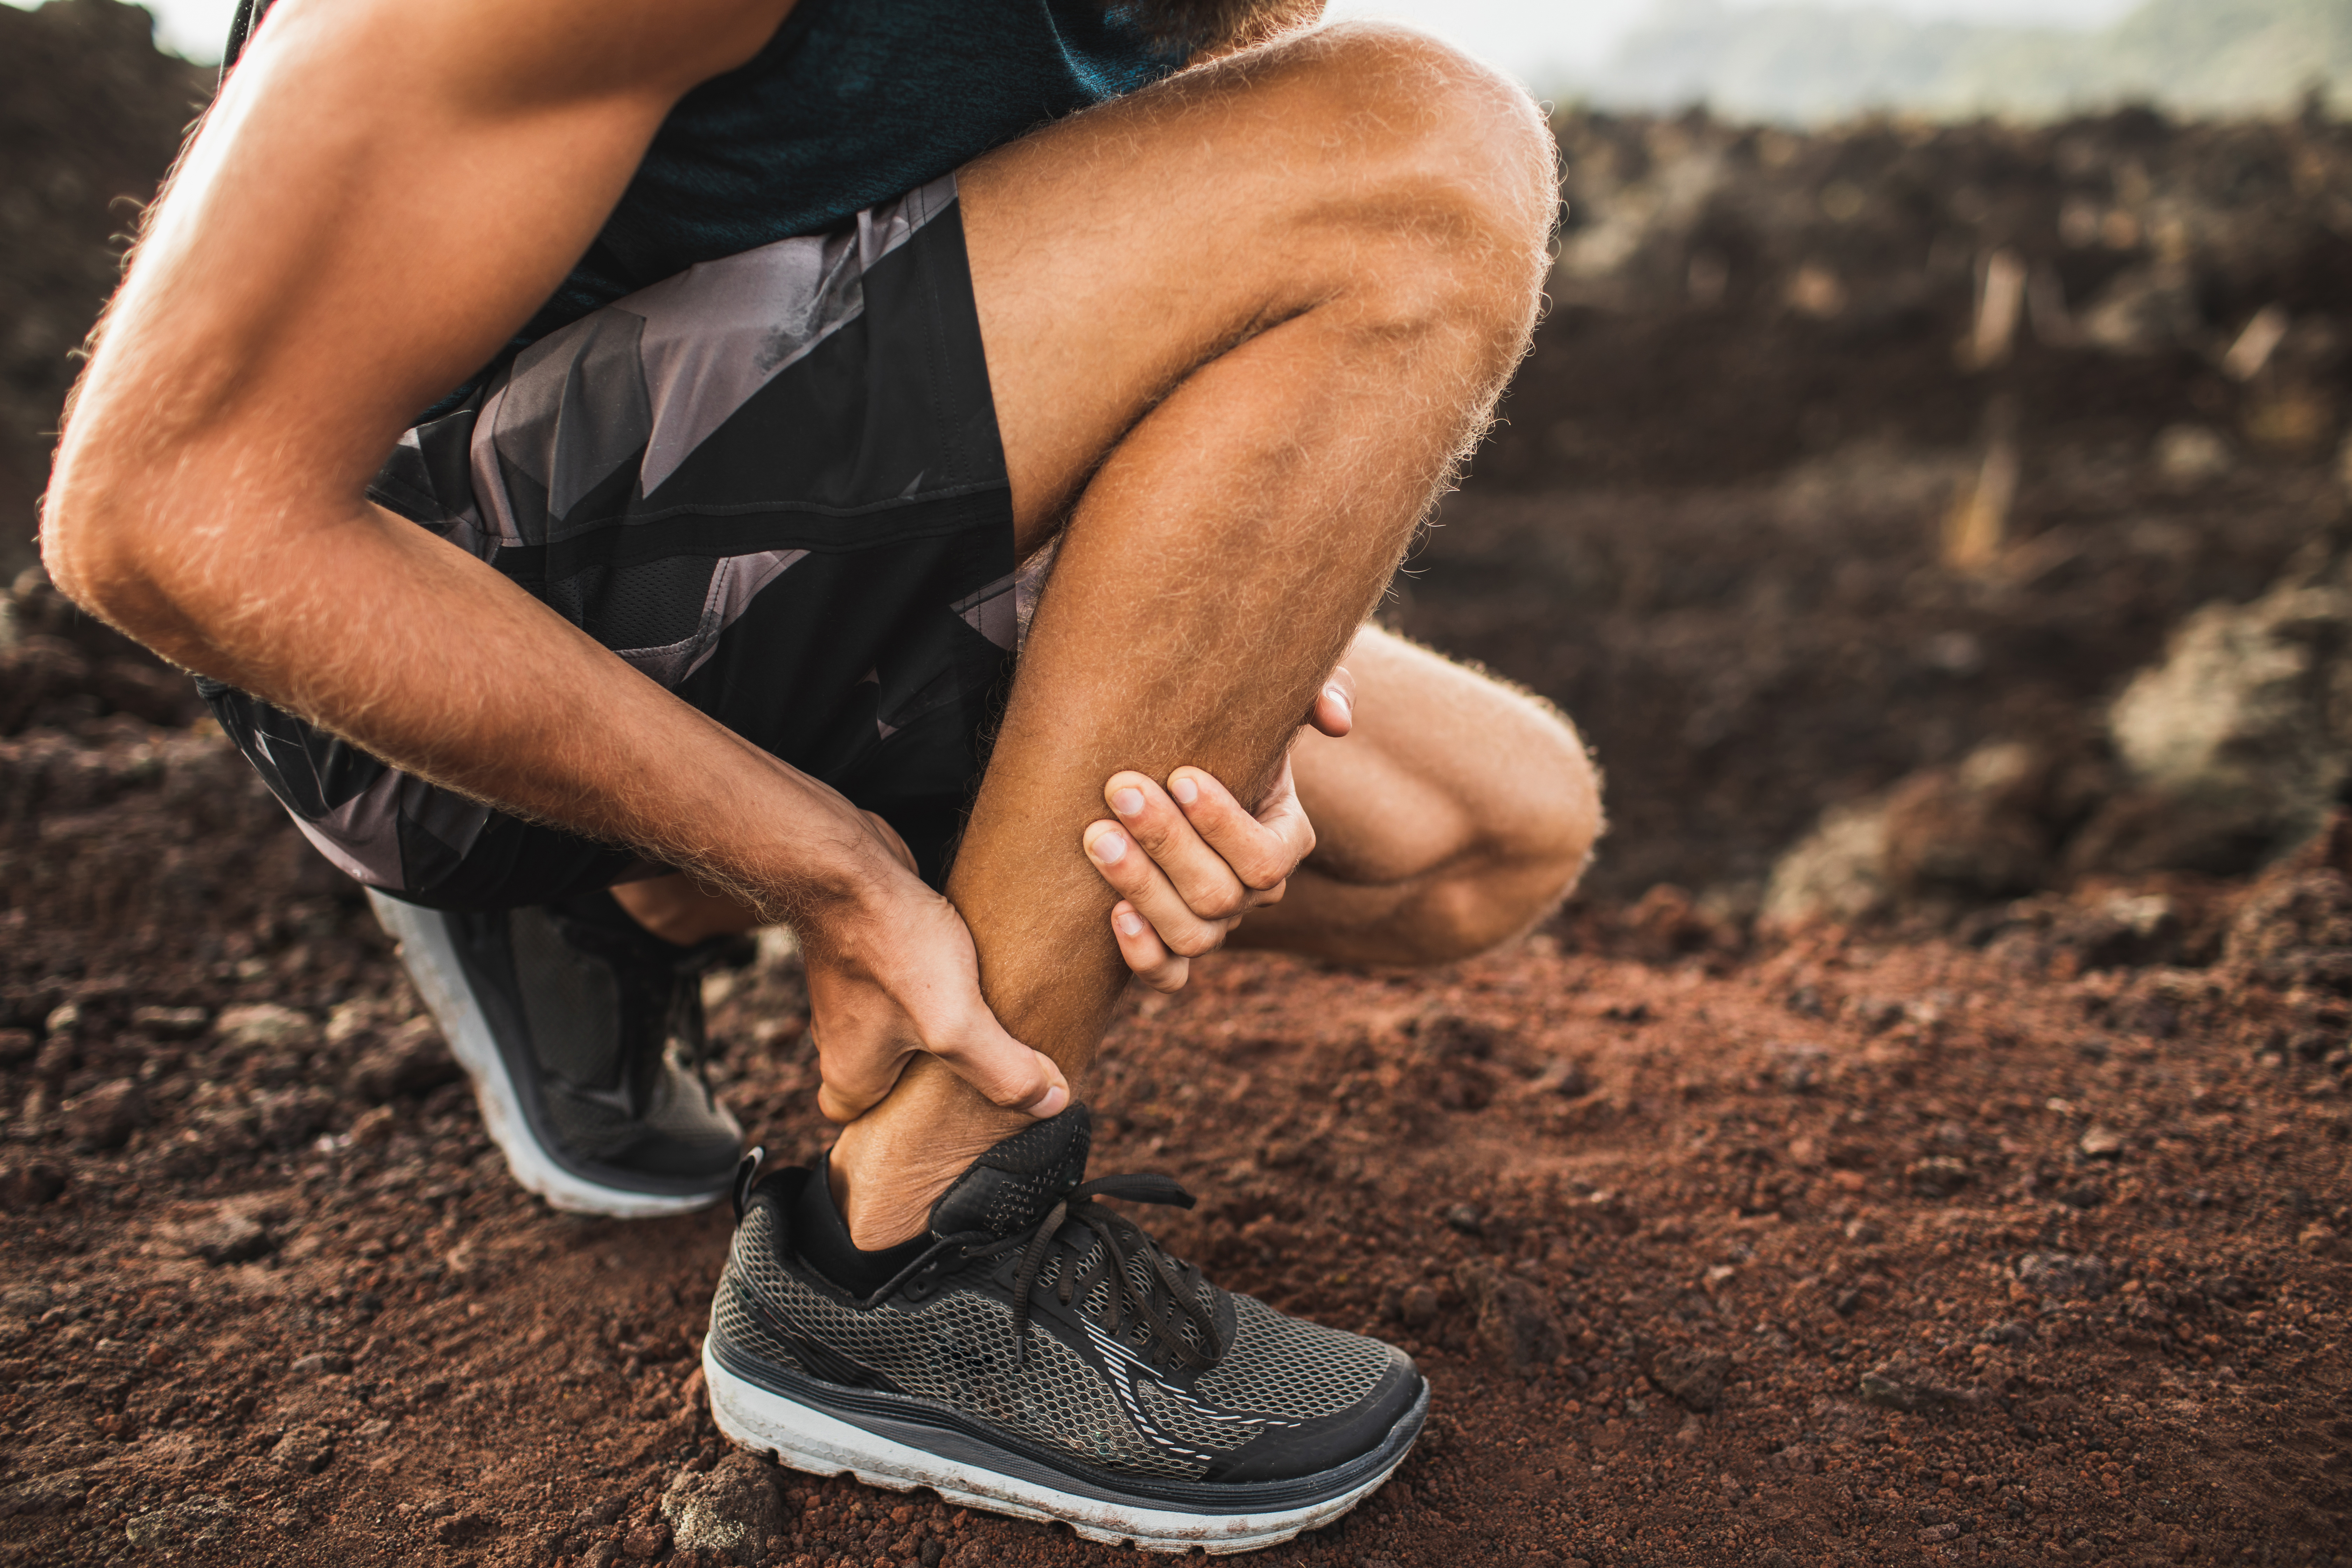 Running injuries can have a negative impact on your training. 